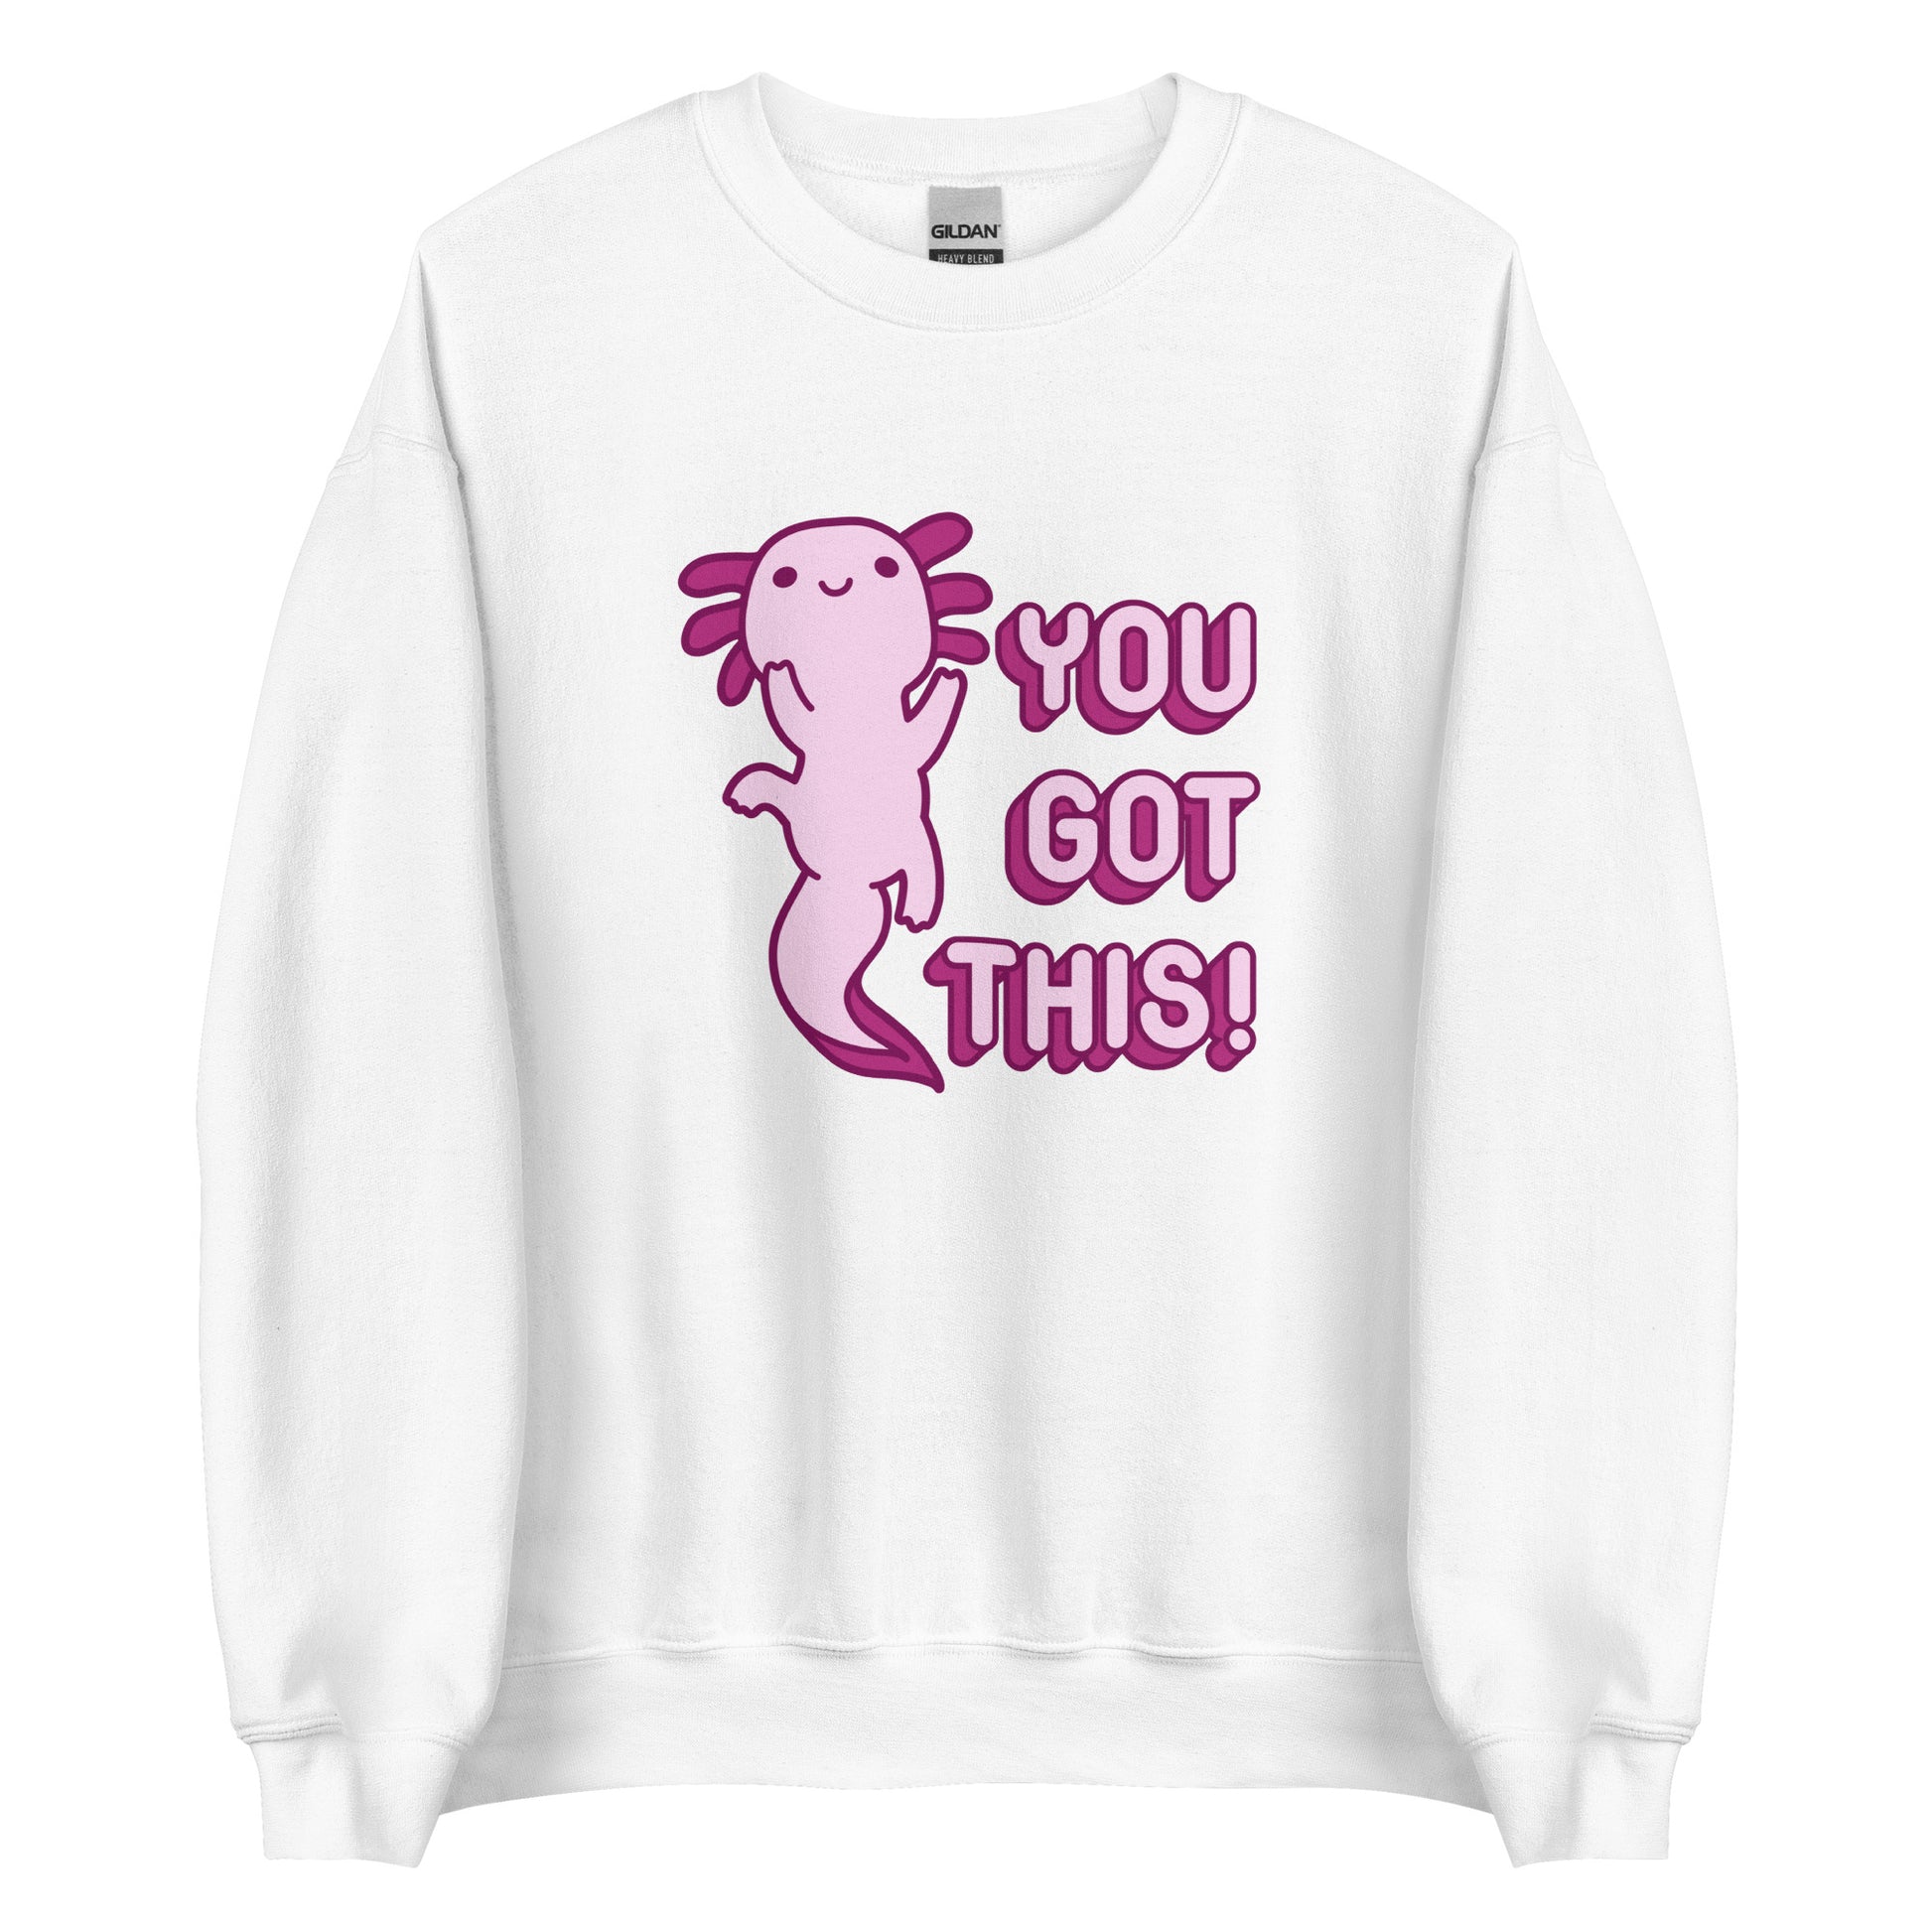 A white crewneck sweatshirt featuring a picture of a a pink axolotl and the words "You Got This!" in pink bubble letters